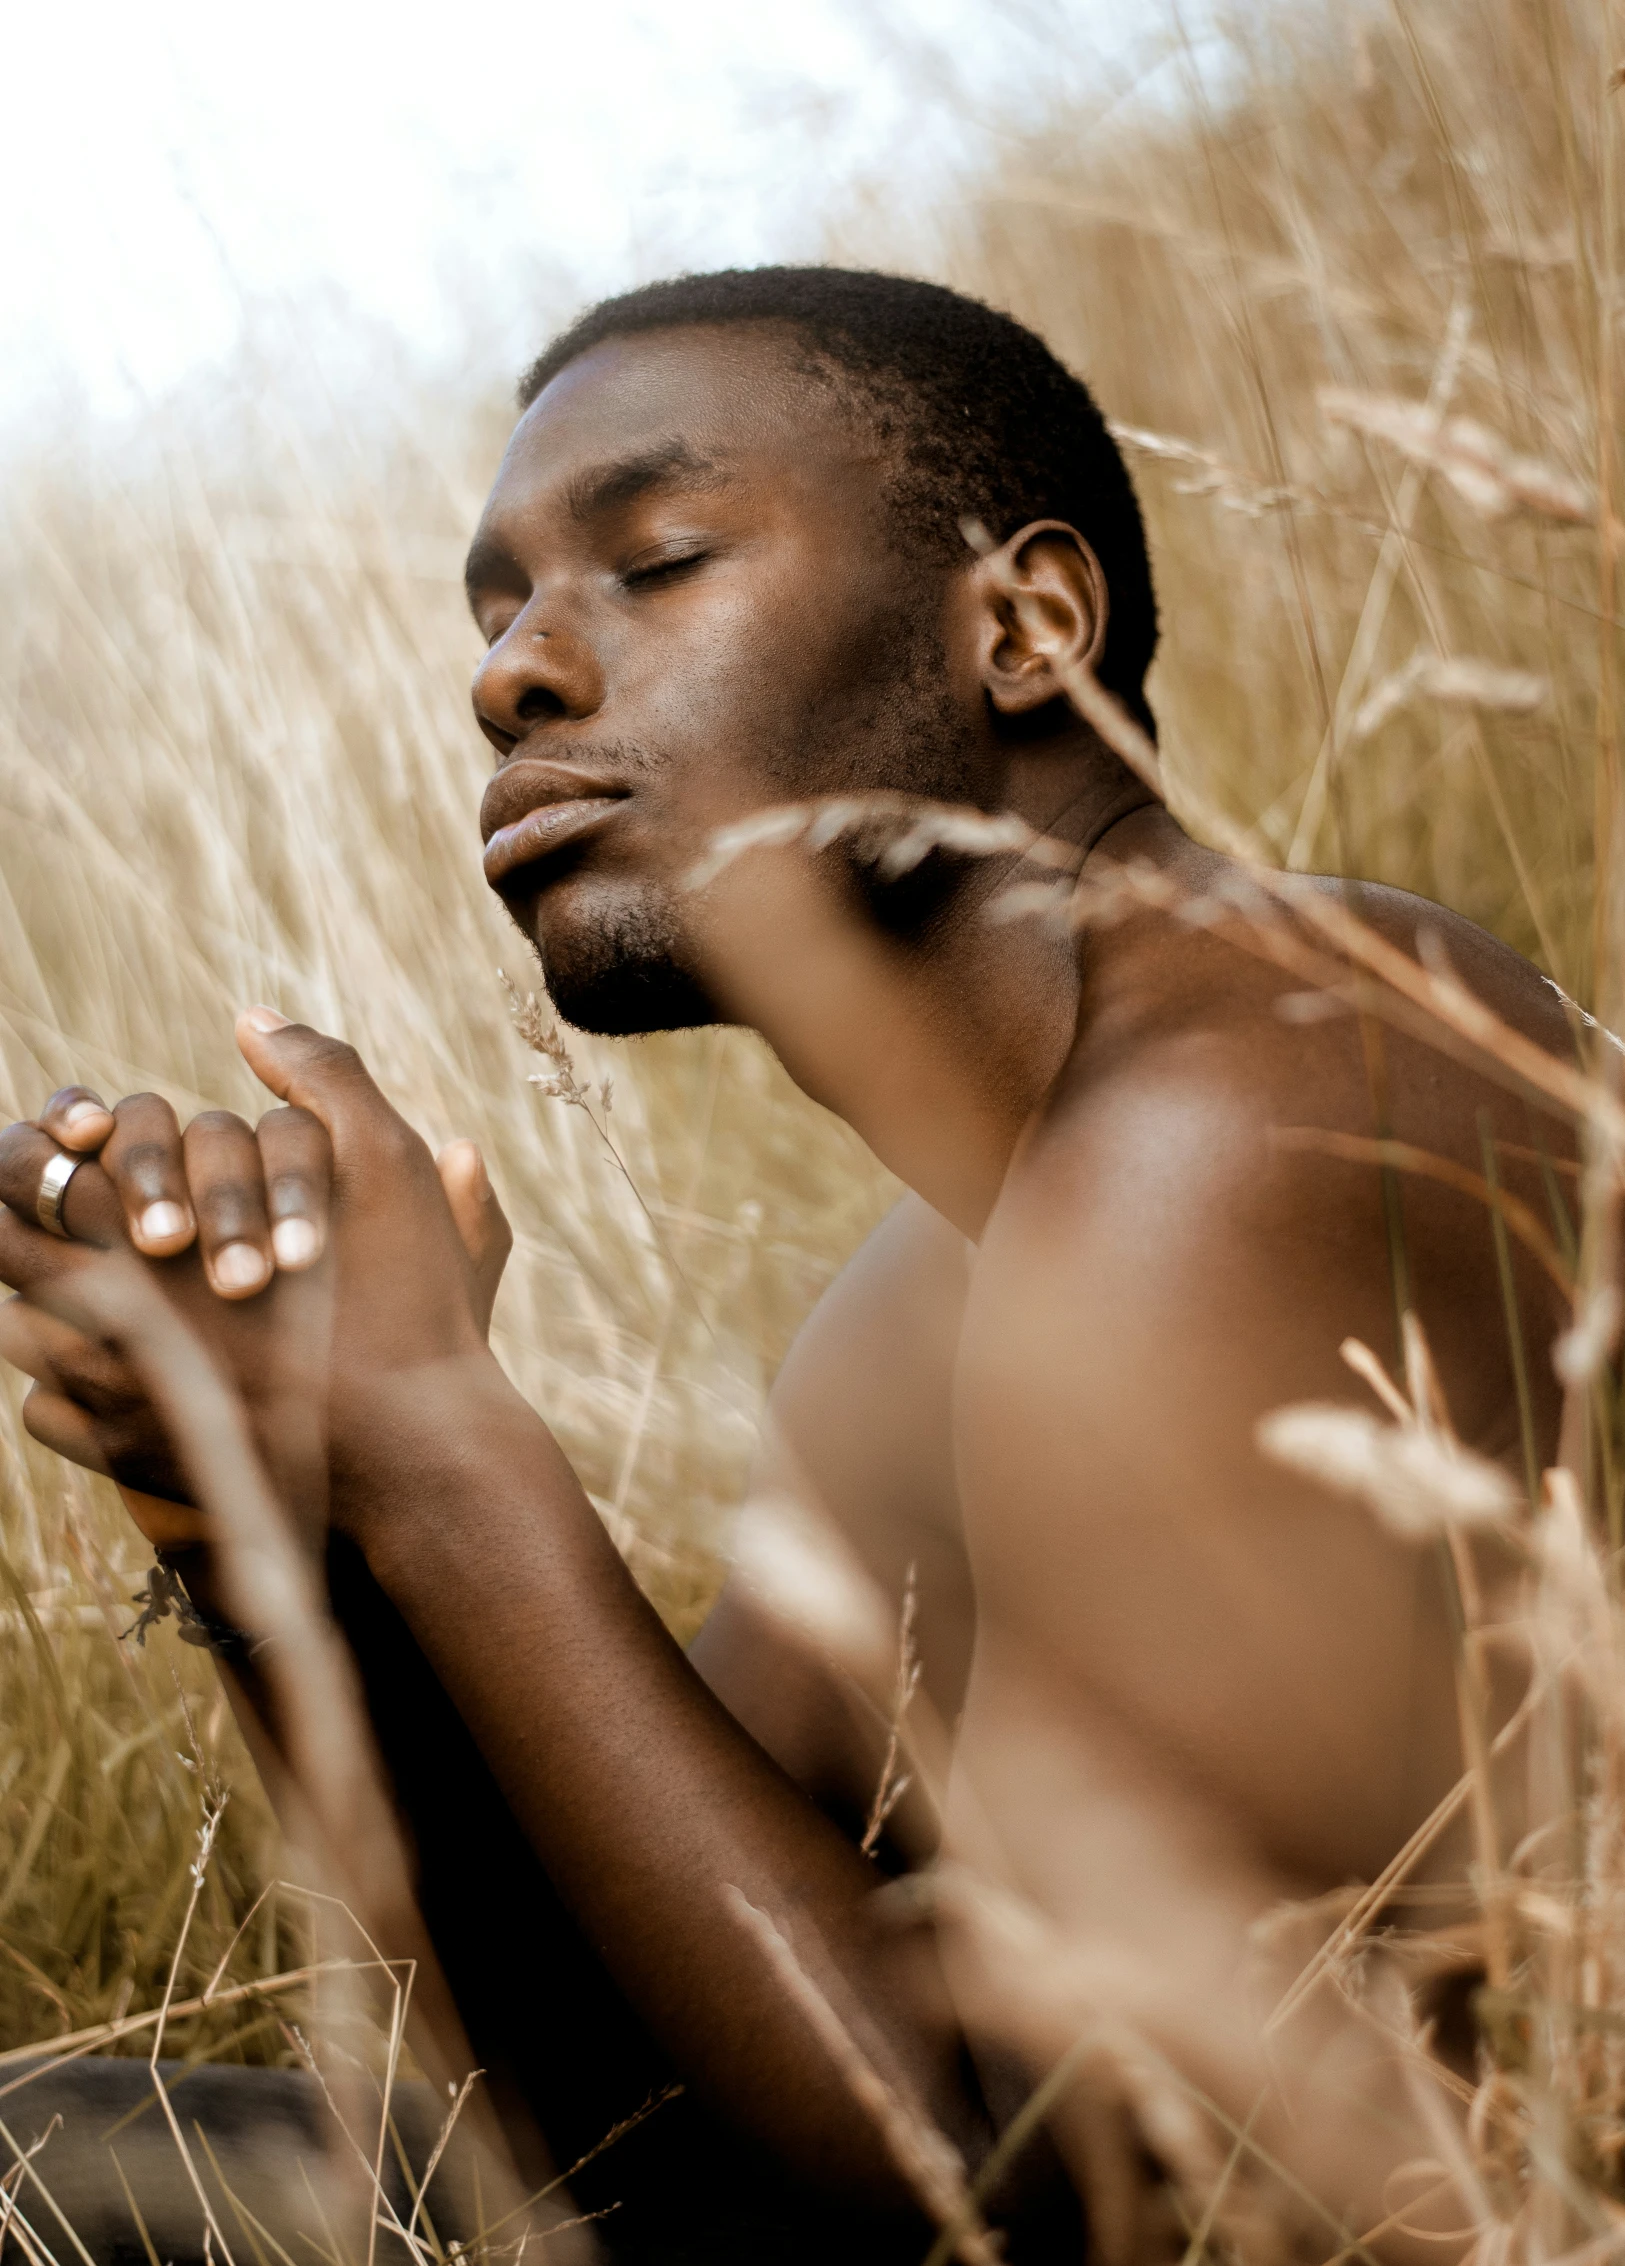 man kneeling in grassy area with hands crossed, praying